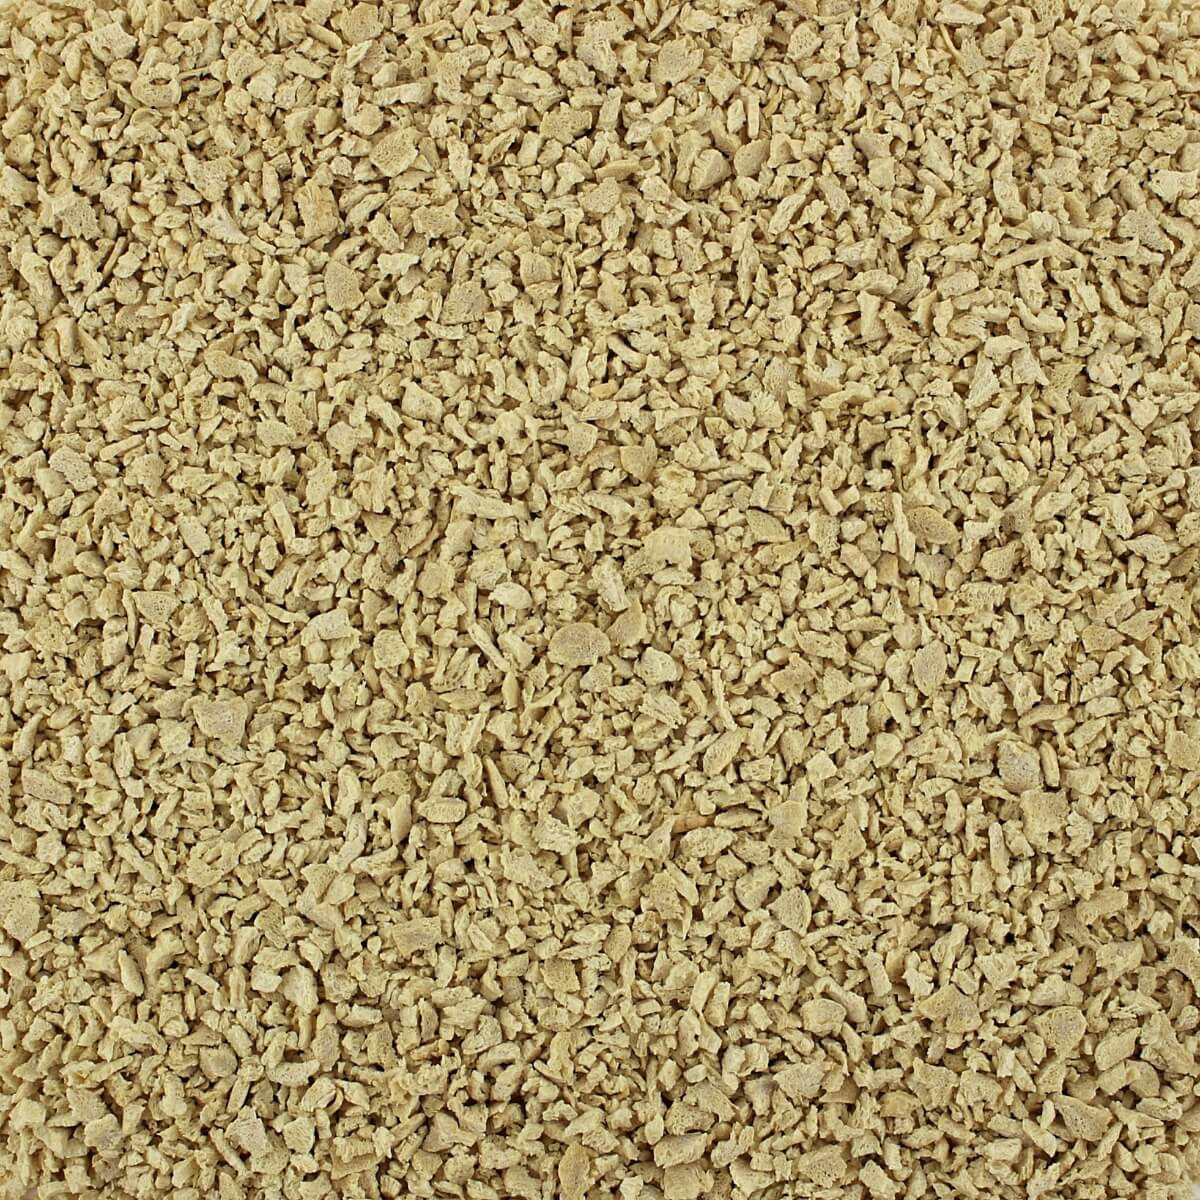 A close up image of a beige textured background with (6 Zip Pouches).